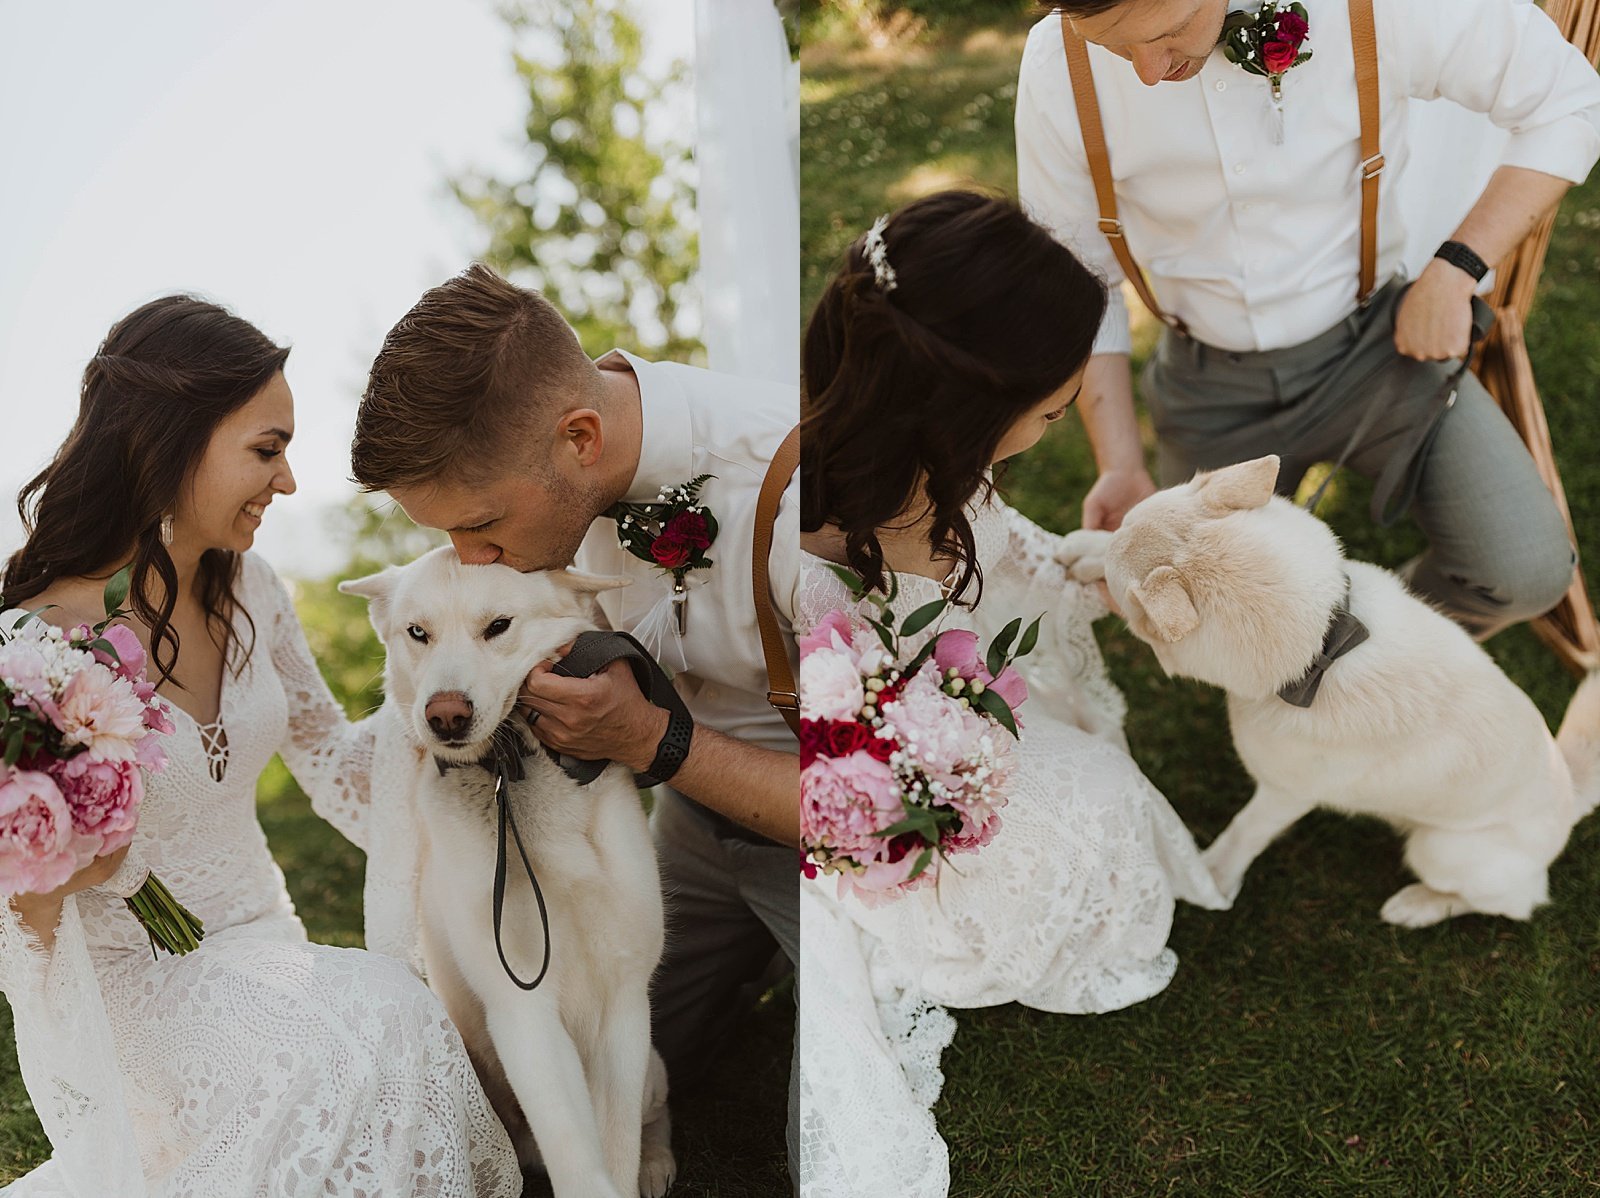  Bride and groom kissing puppy after their wedding ceremony outside.  